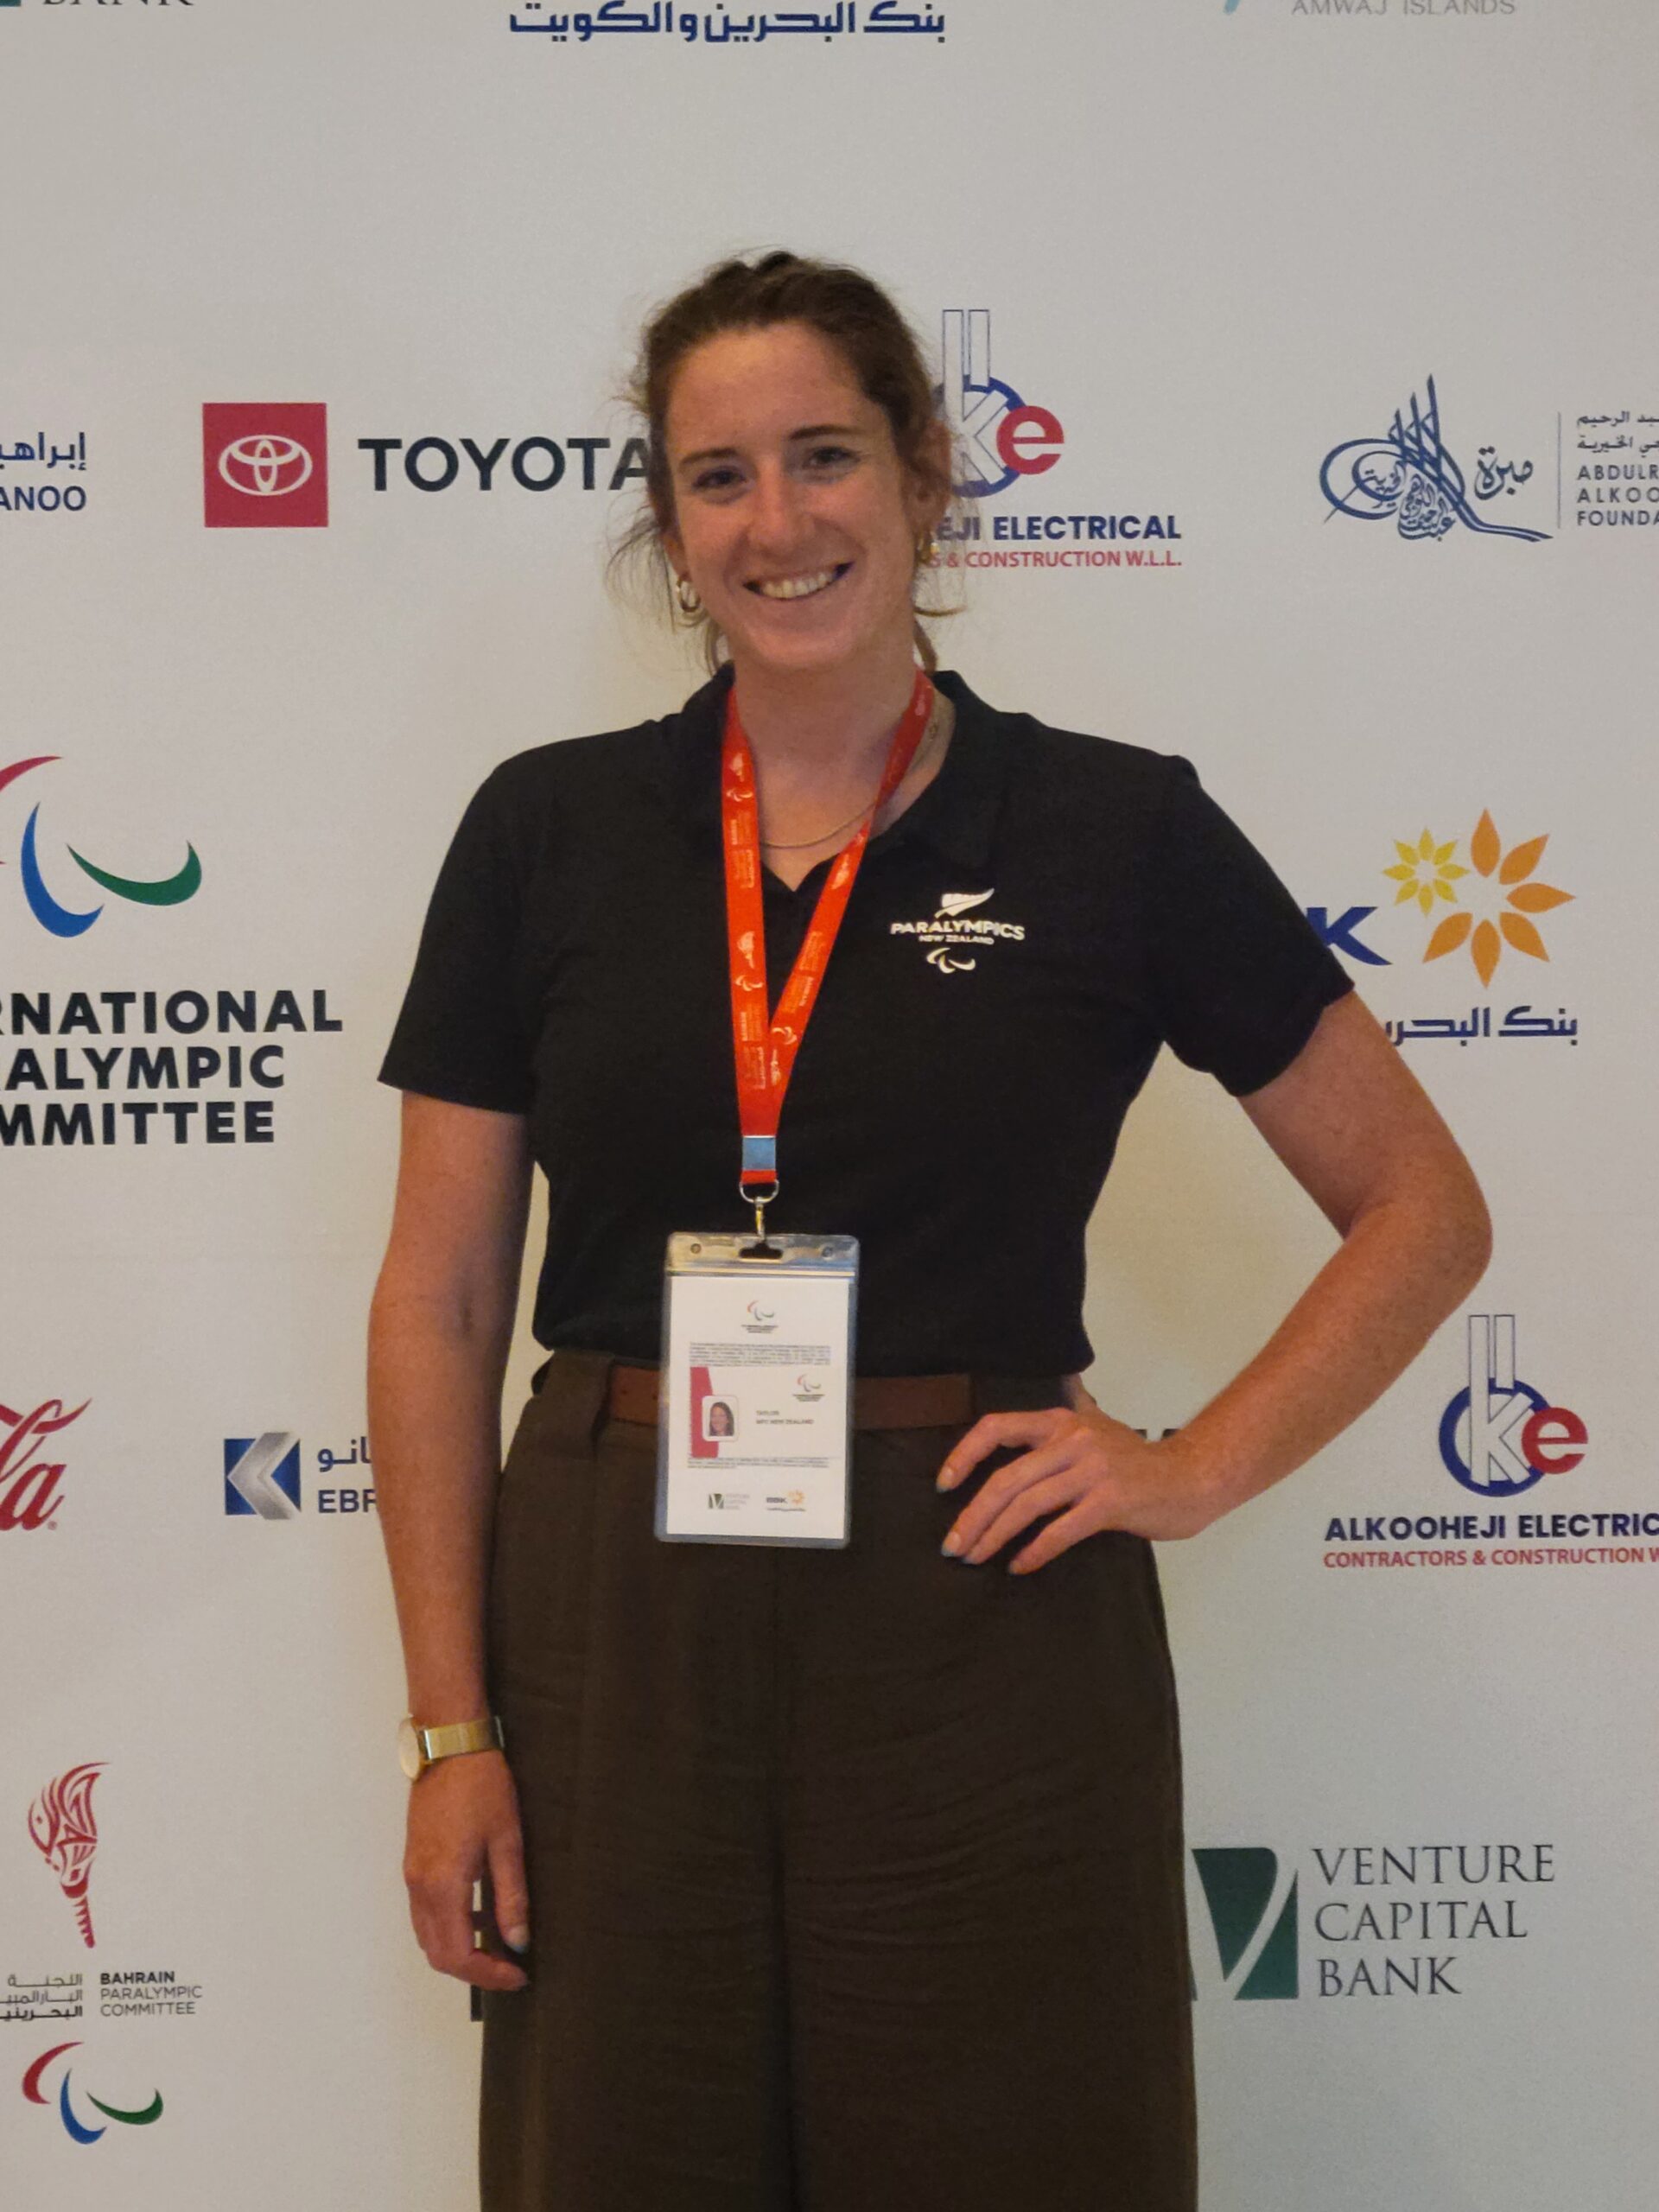 Athletes' Council rep Anna has one hand on her hip and wears black clothes and a red lanyard as she stands for a photo in front of a logo wall